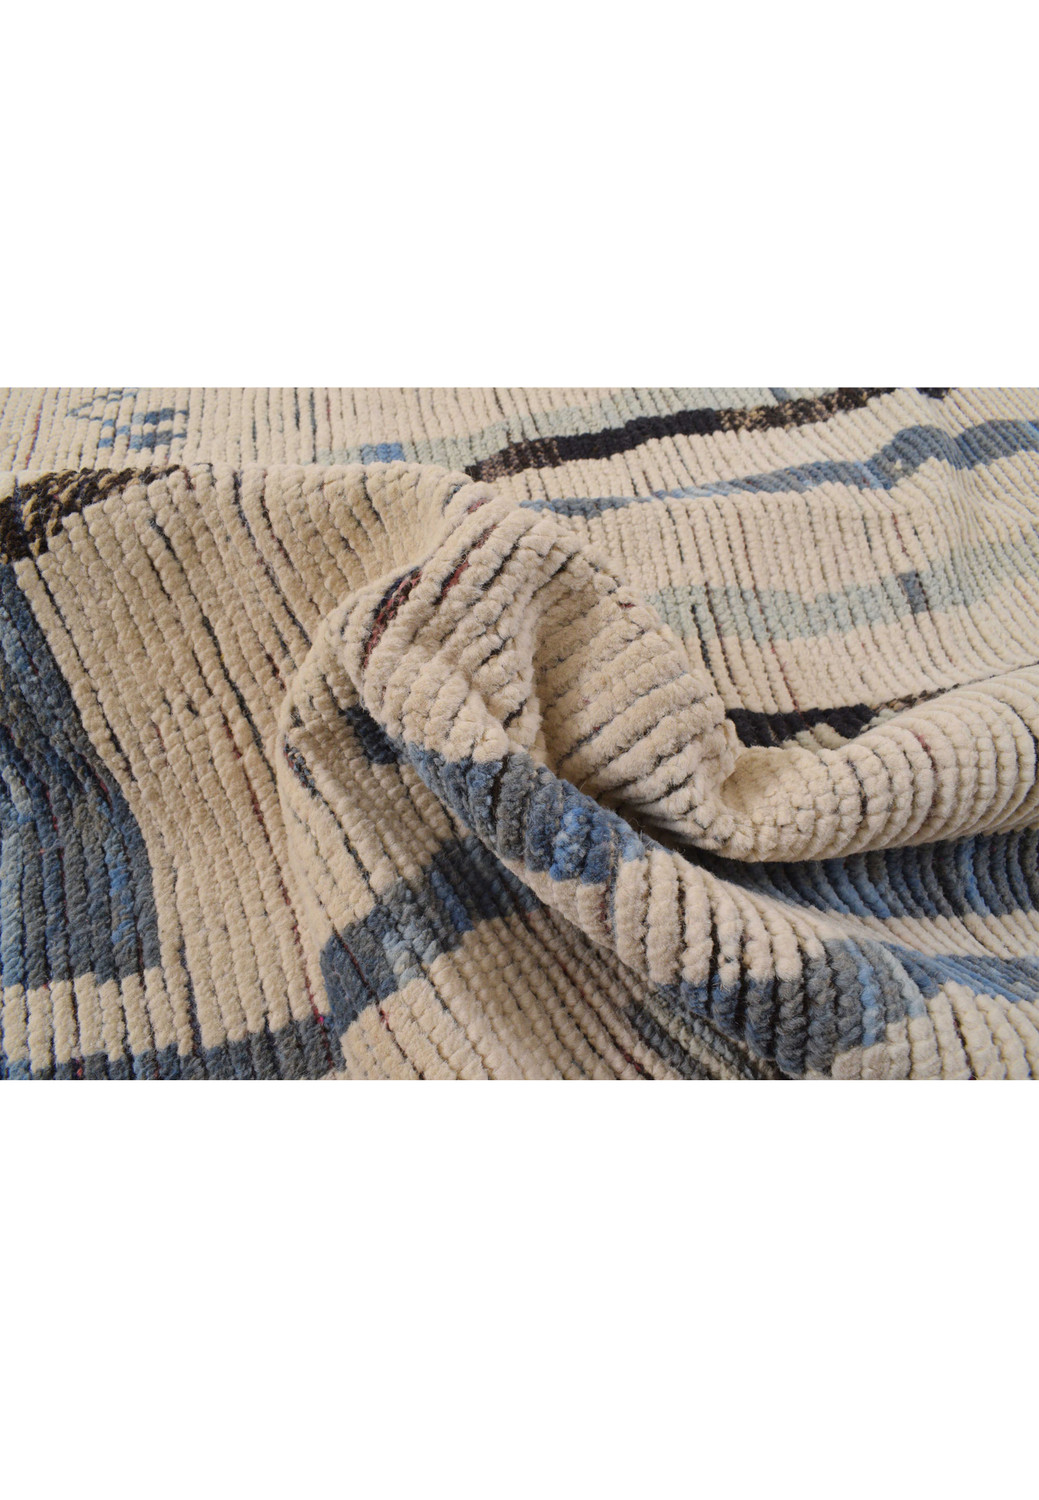 Curved edge of the rug, focusing on the intricate patterns and the soft undulation of the rug's edge.